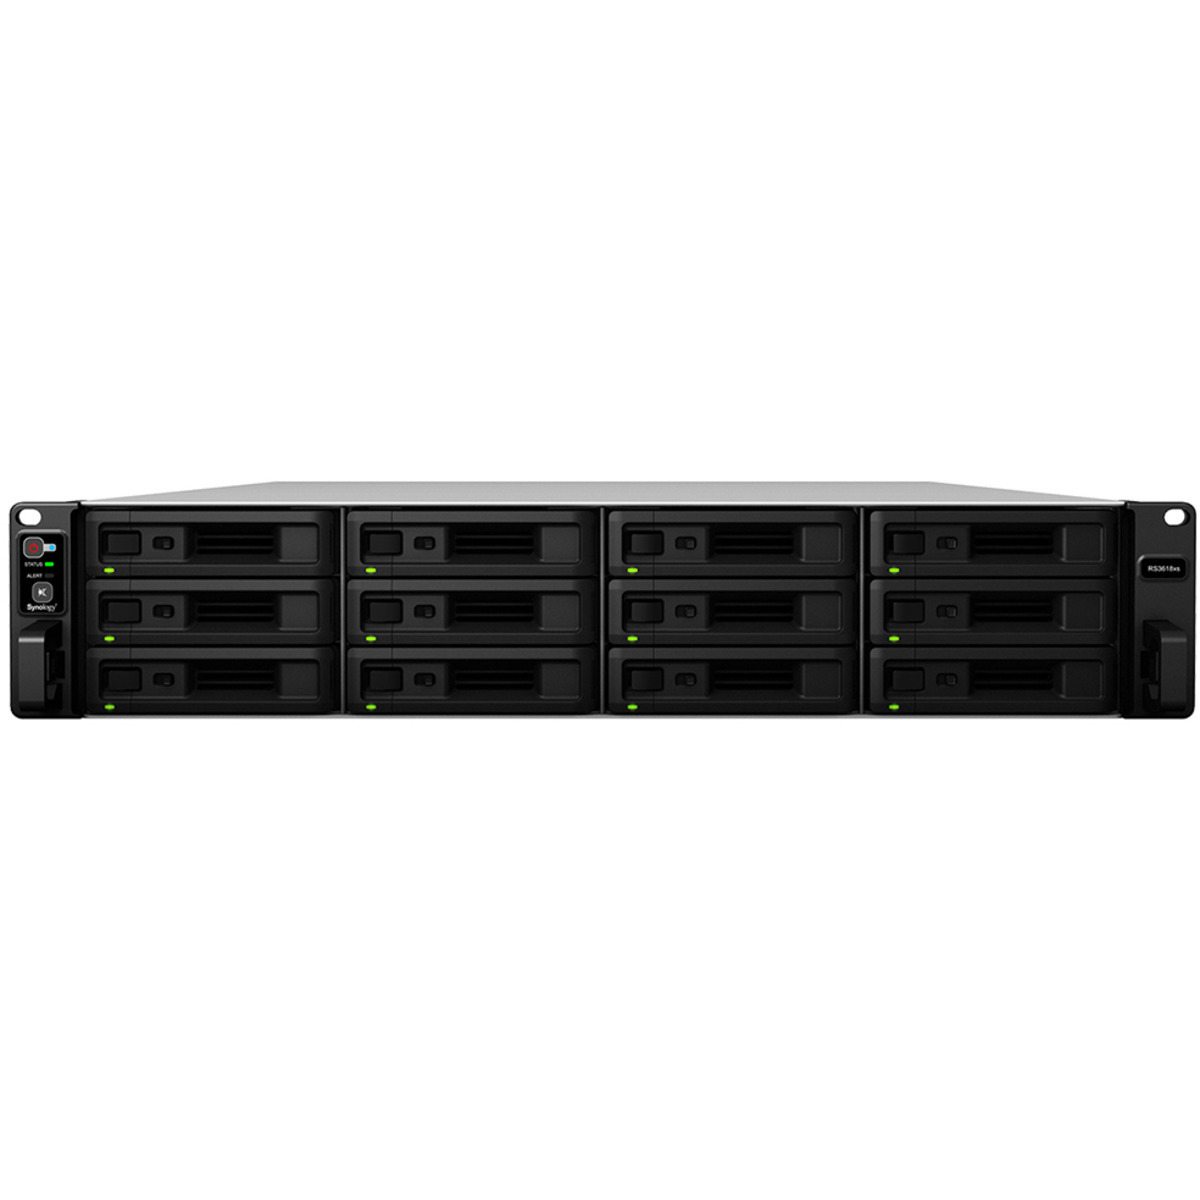 Synology RackStation RS3618xs 96tb 12-Bay RackMount Large Business / Enterprise NAS - Network Attached Storage Device 8x12tb Synology Plus Series HAT3310-12T 3.5 7200rpm SATA 6Gb/s HDD NAS Class Drives Installed - Burn-In Tested RackStation RS3618xs